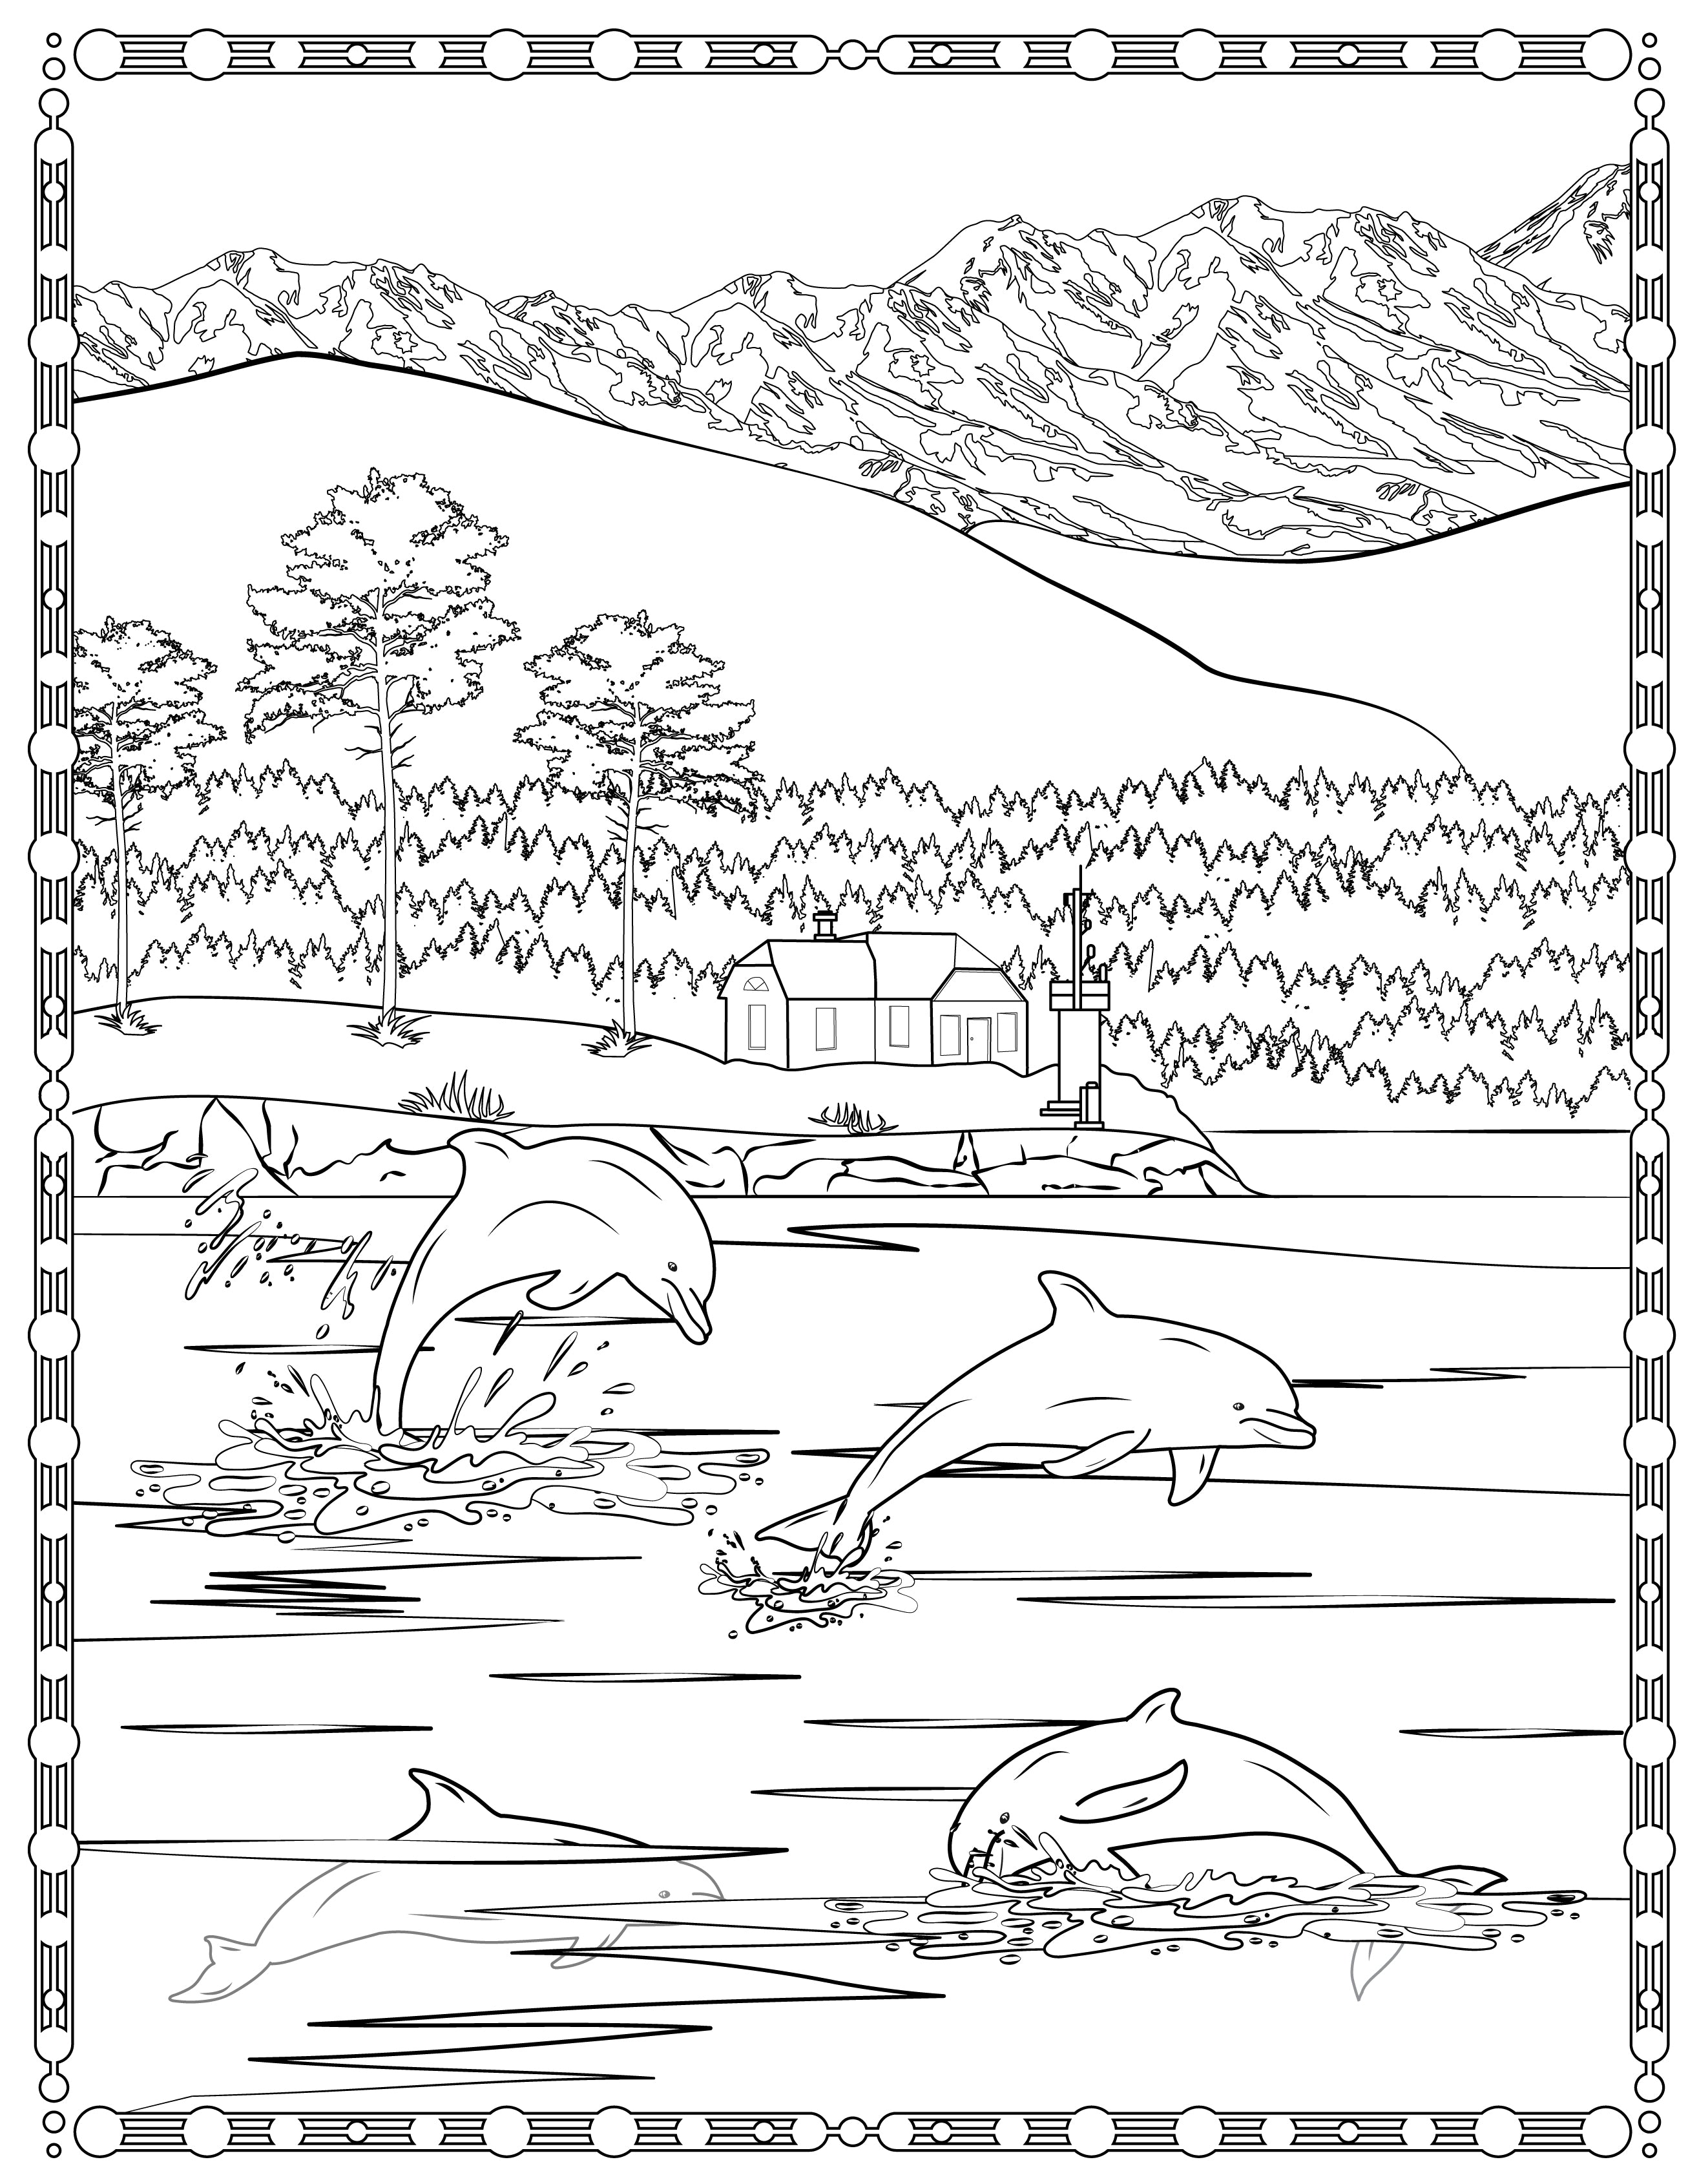 Single Coloring Book Page - Turn Point Lighthouse, Washington - Digital Print-from-Home